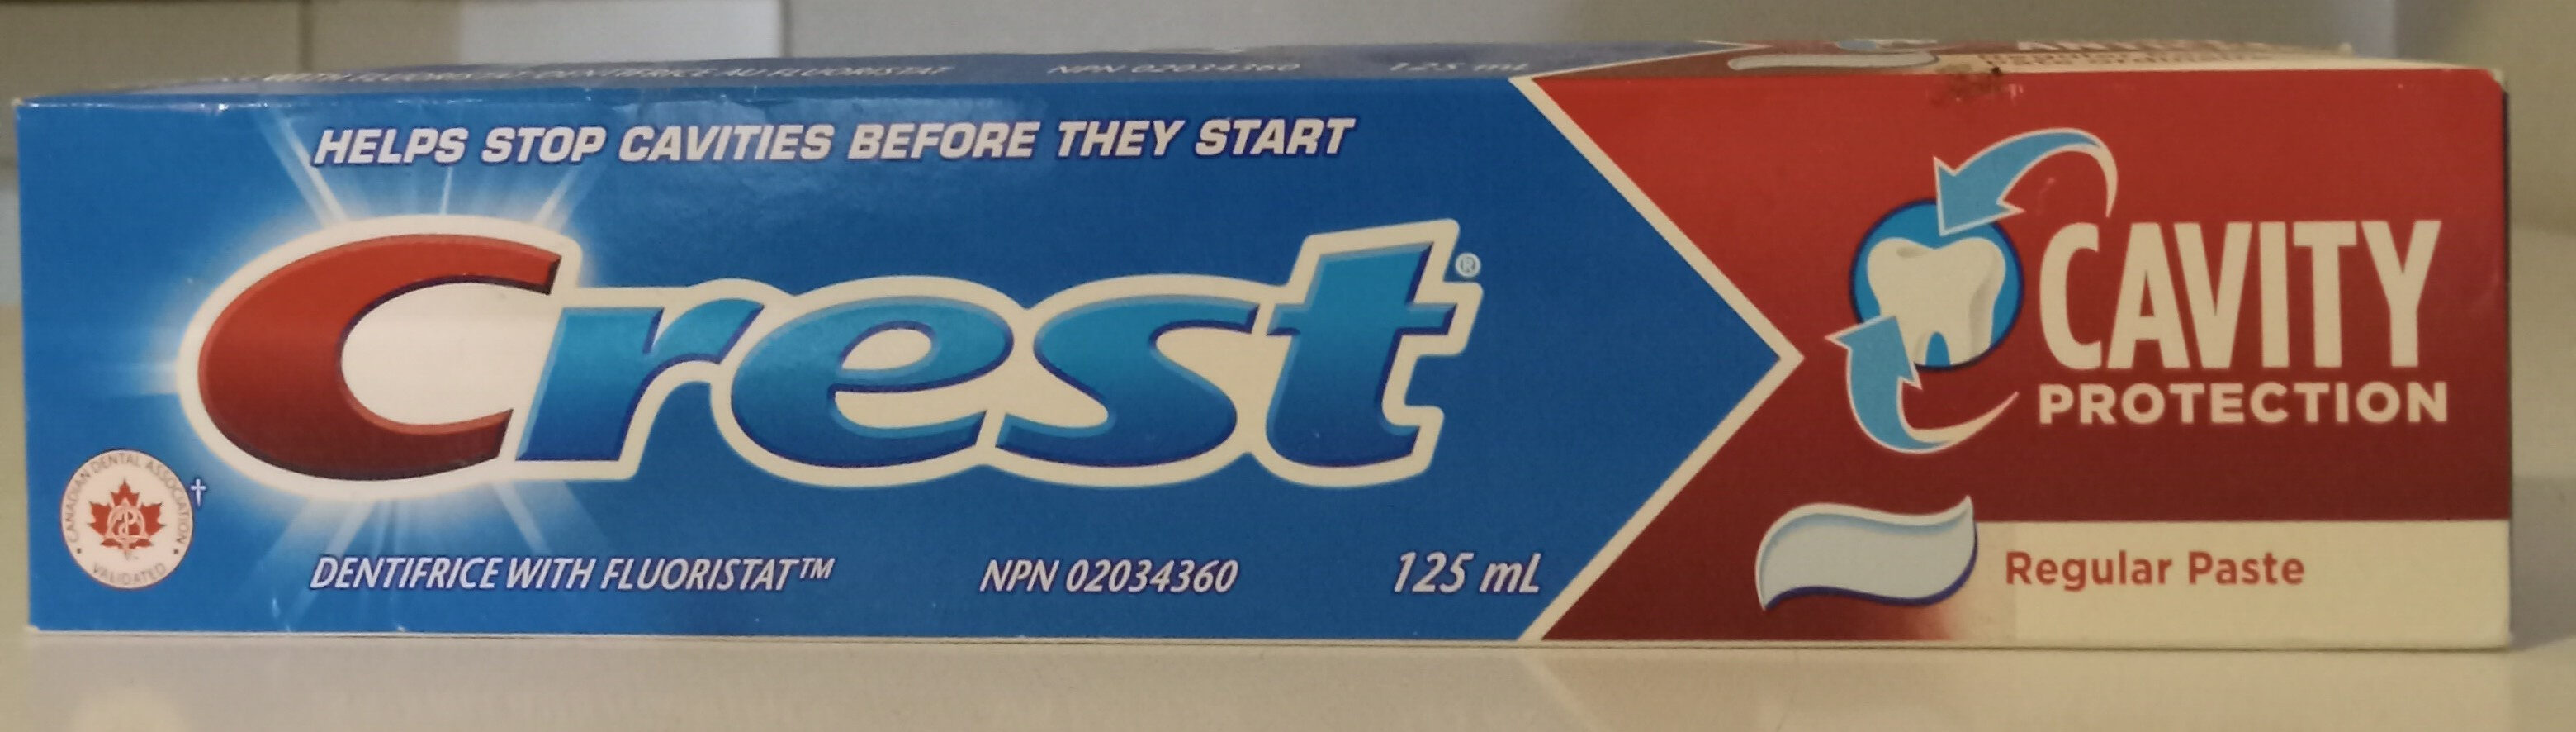 Regular Paste Cavity Protection Dentifrice with Flouristat - Product - en